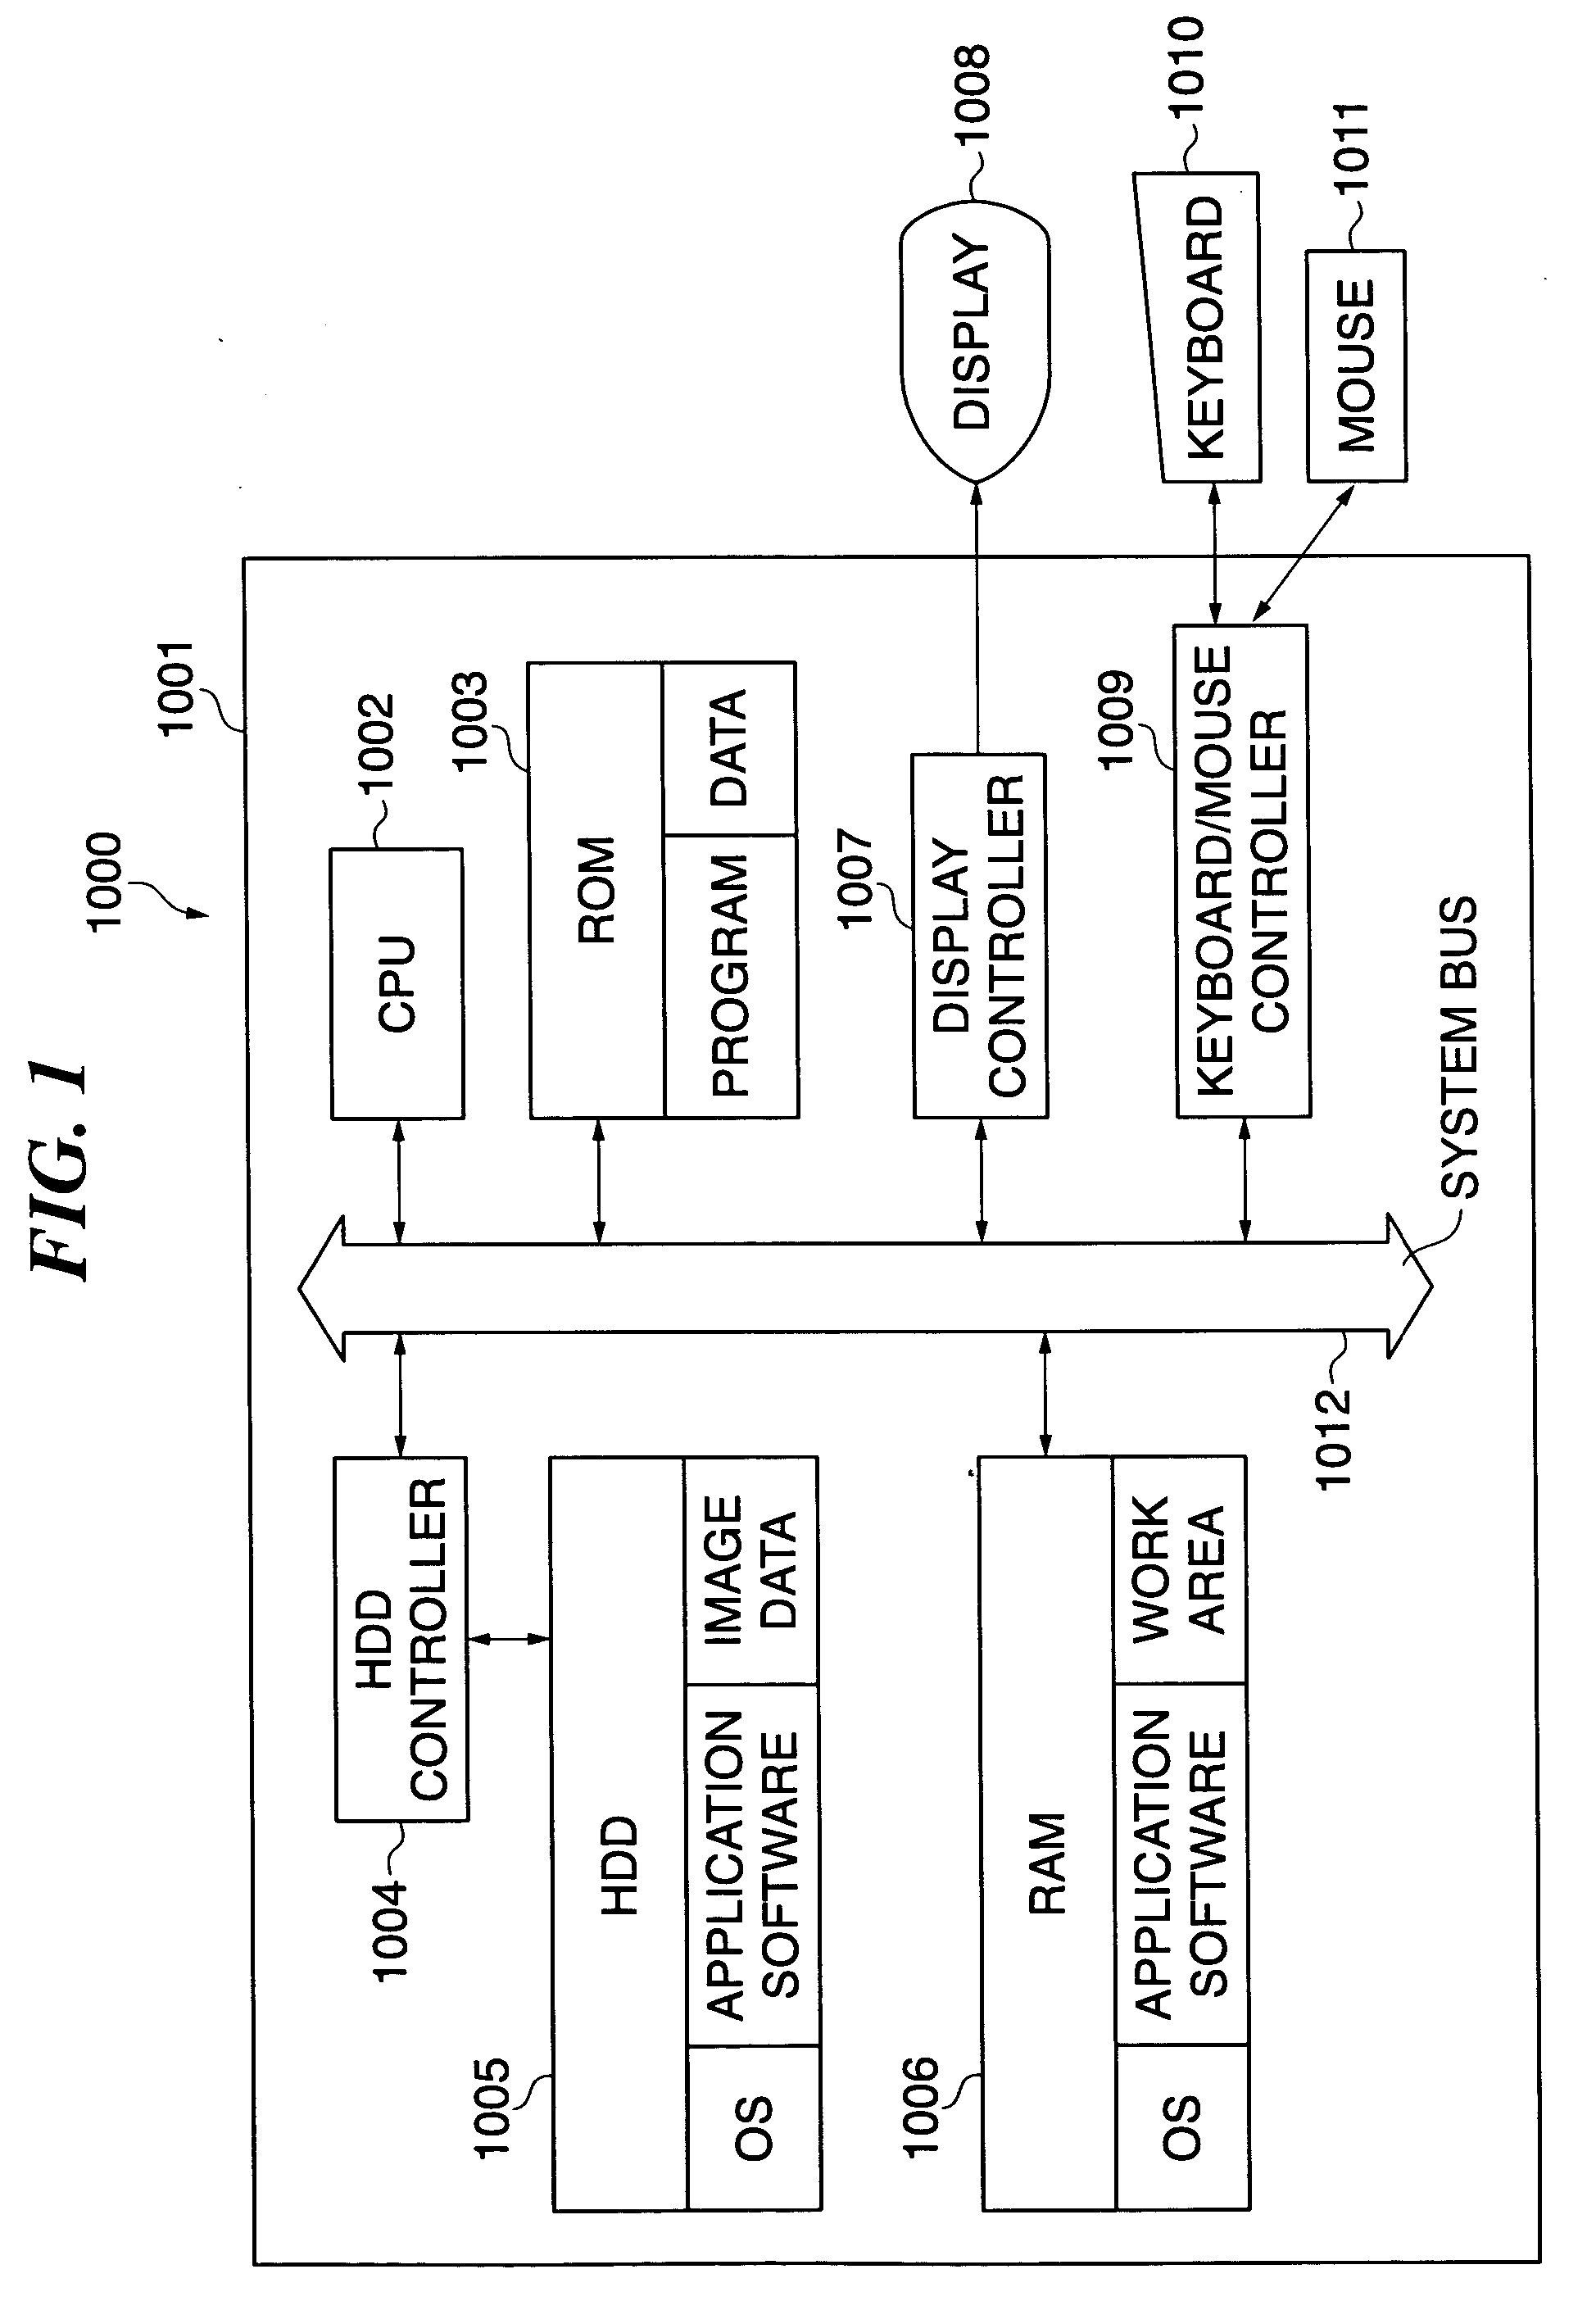 Image processing apparatus, image processing method, program for implementing the method, and storage medium storing the program